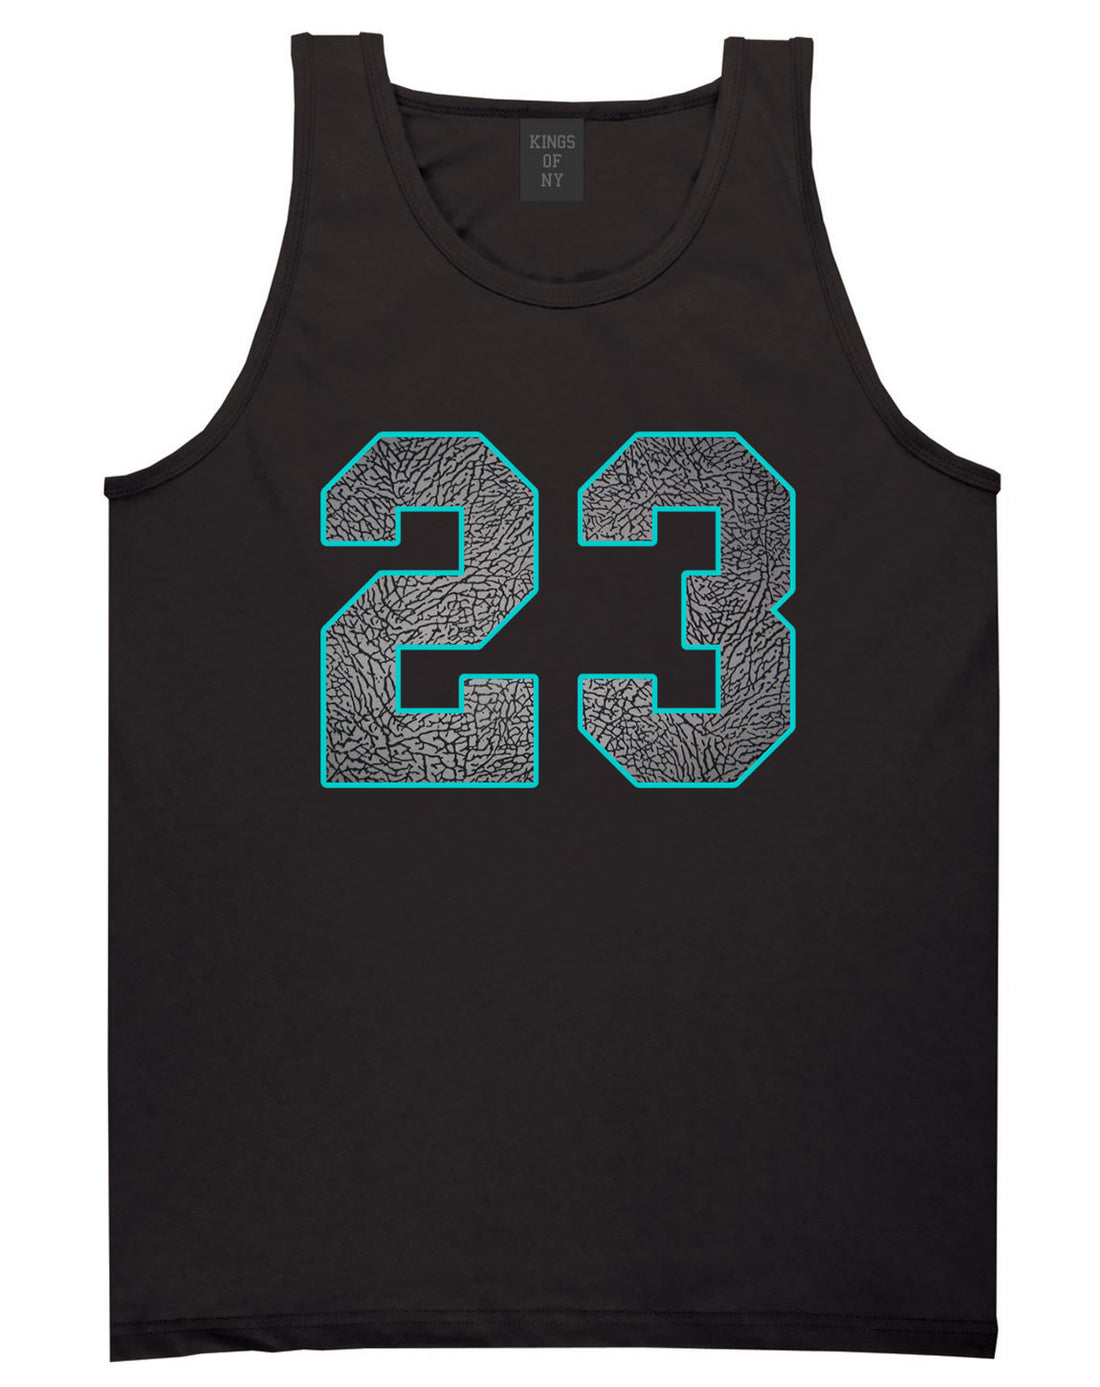 23 Cement Blue Jersey Tank Top in Black By Kings Of NY